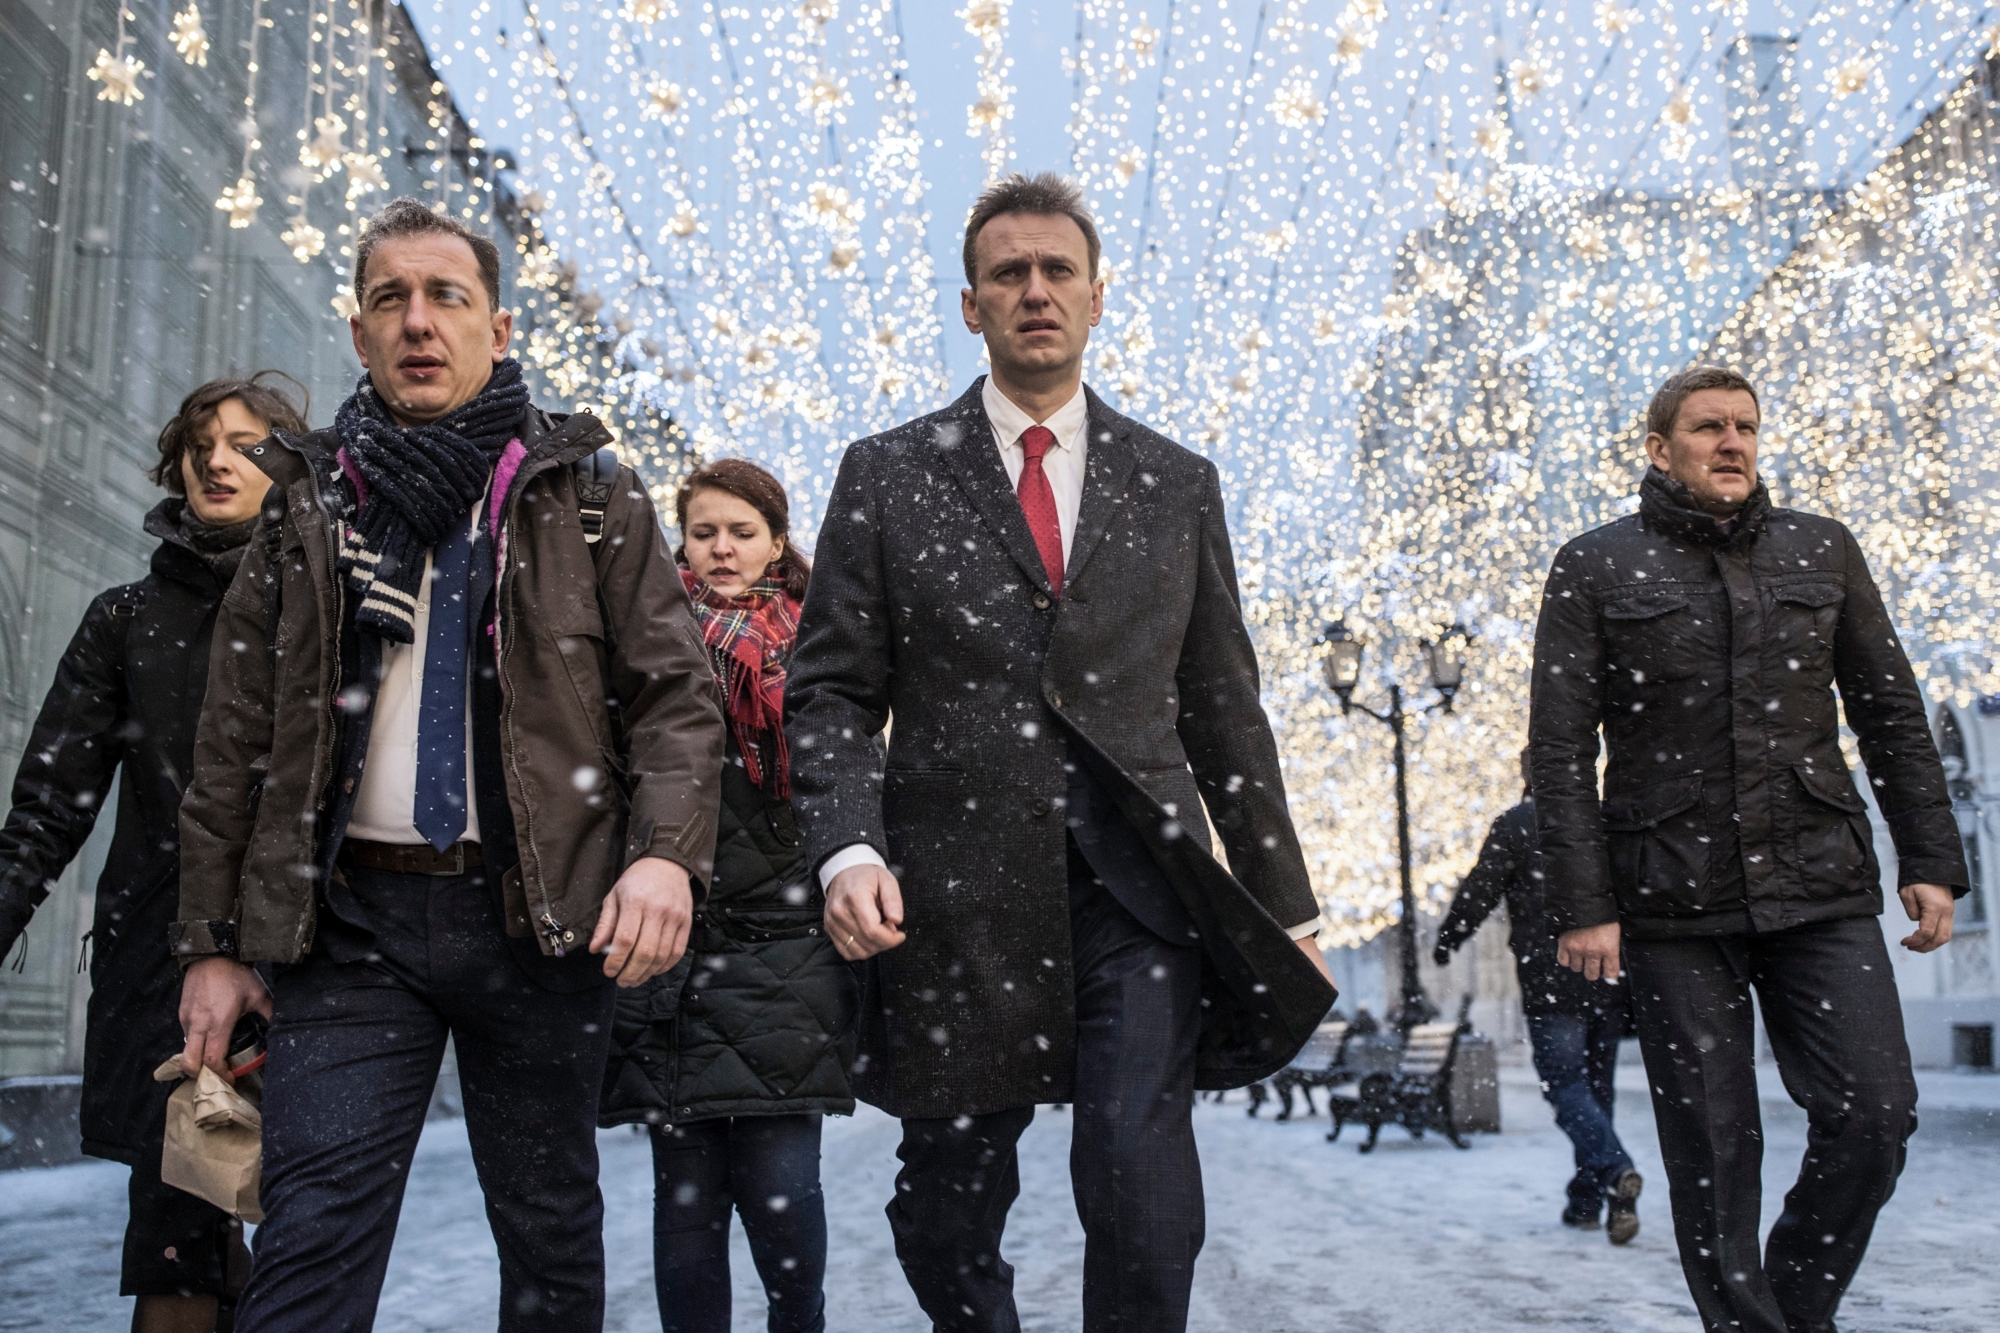 Russian opposition leader Alexei Navalny, who submitted endorsement papers necessary for his registration as a presidential candidate, center, heads to attend a meeting in the Russia's Central Election commission in Moscow, Russia, Monday, Dec. 25, 2017. Russian election officials have formally barred Russian opposition leader Alexei Navalny from running for president. (Evgeny Feldman/Navalny Campaign via AP) APTOPIX Russia Election